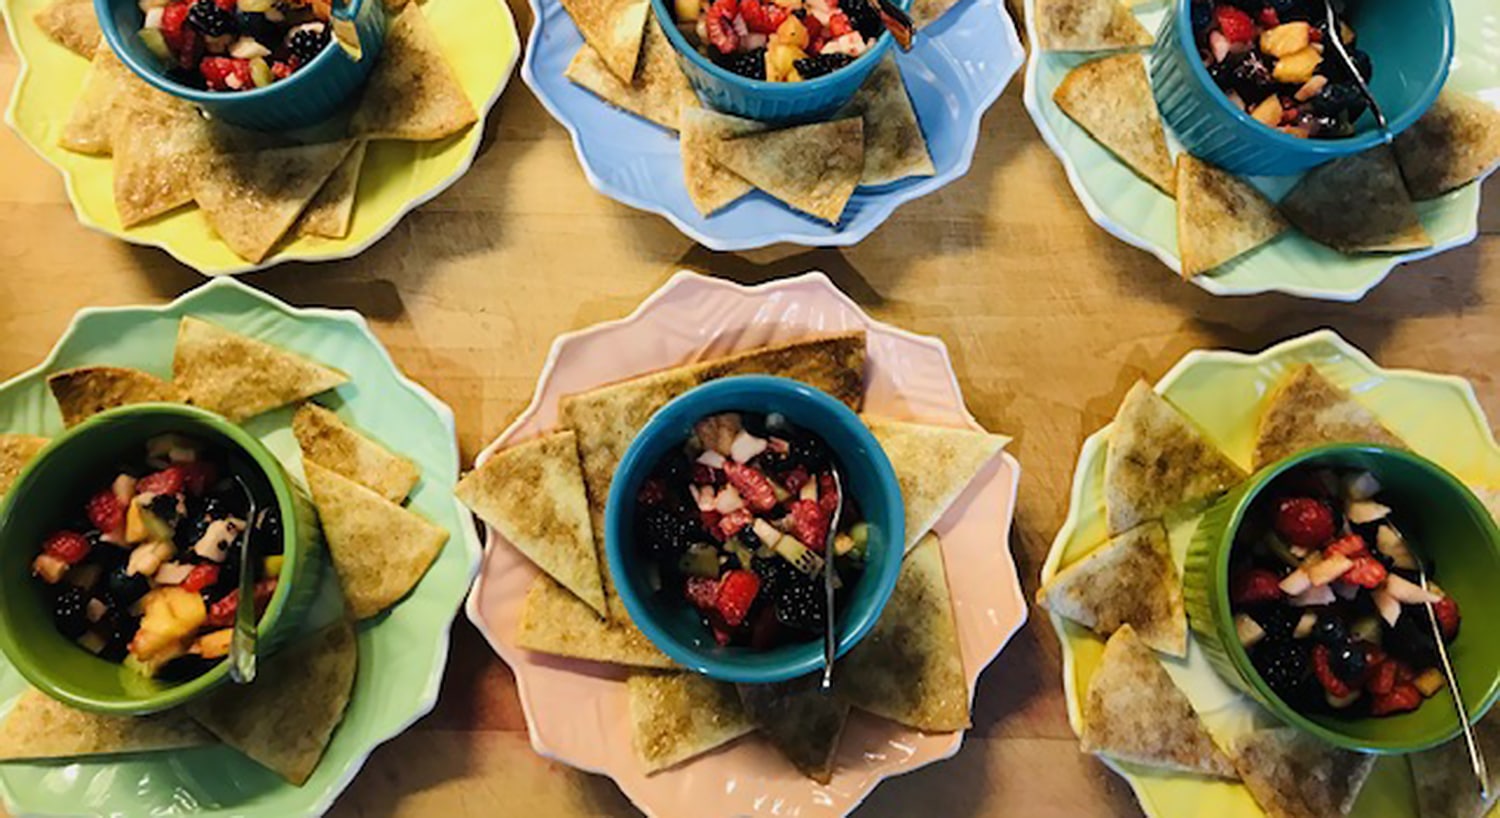 Colorful decorative dishes with mixed fruit salad and triangular flat bread.